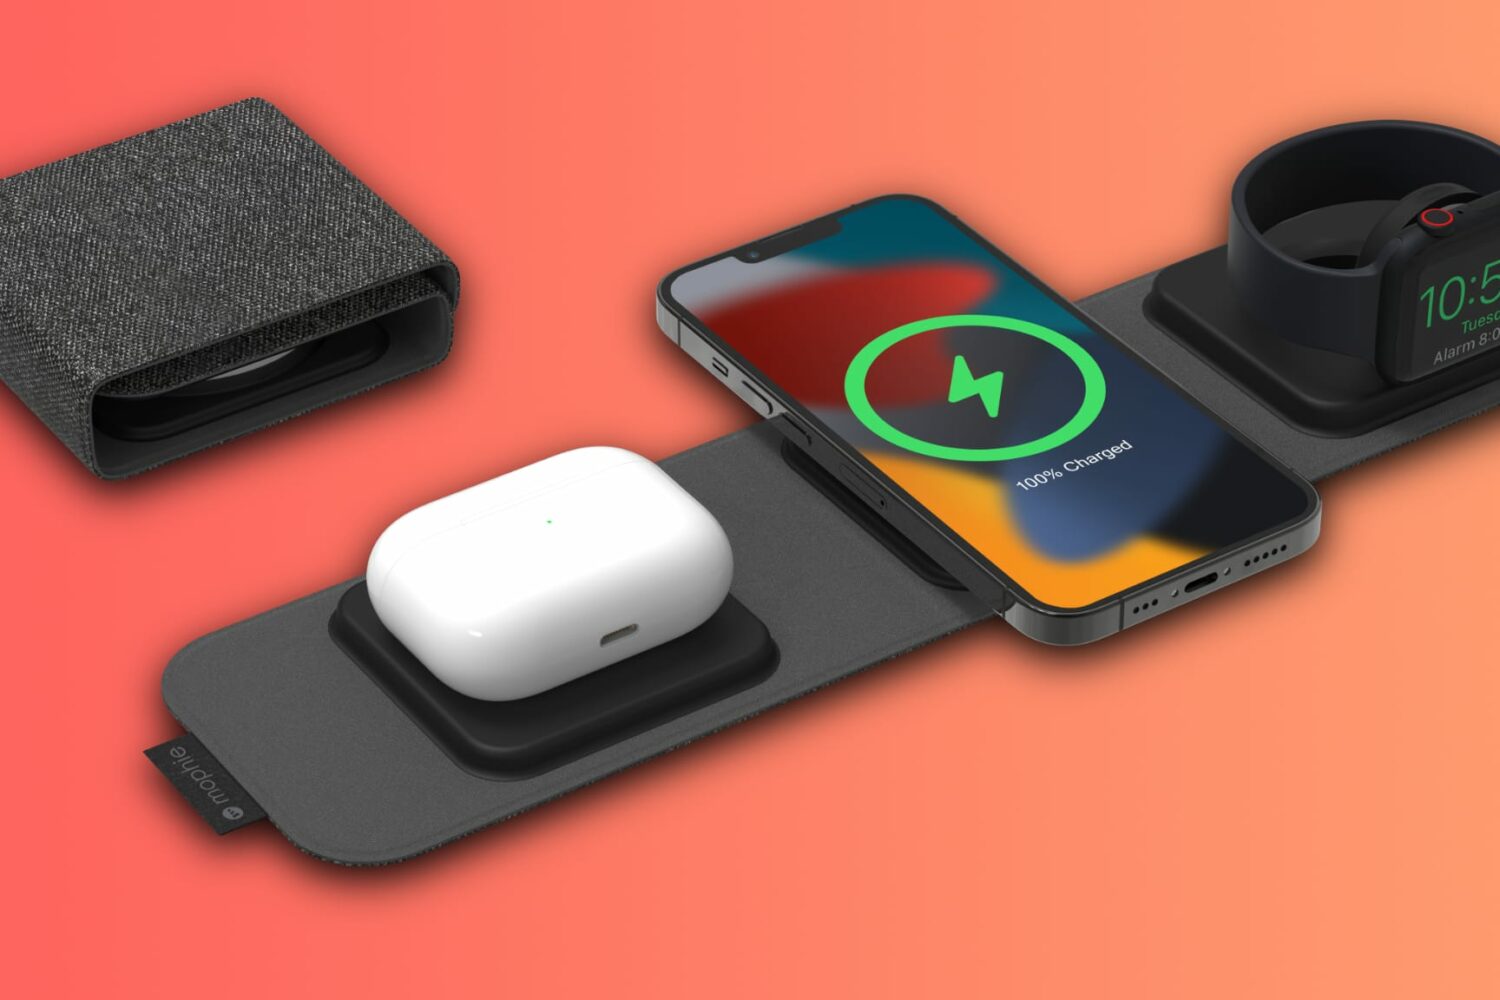 A rendering showing an isometric view of Mophie's 3-in-1 travel charger with AirPods, iPhone and Apple Watch resting on its charging pads, set against a light orange gradient background